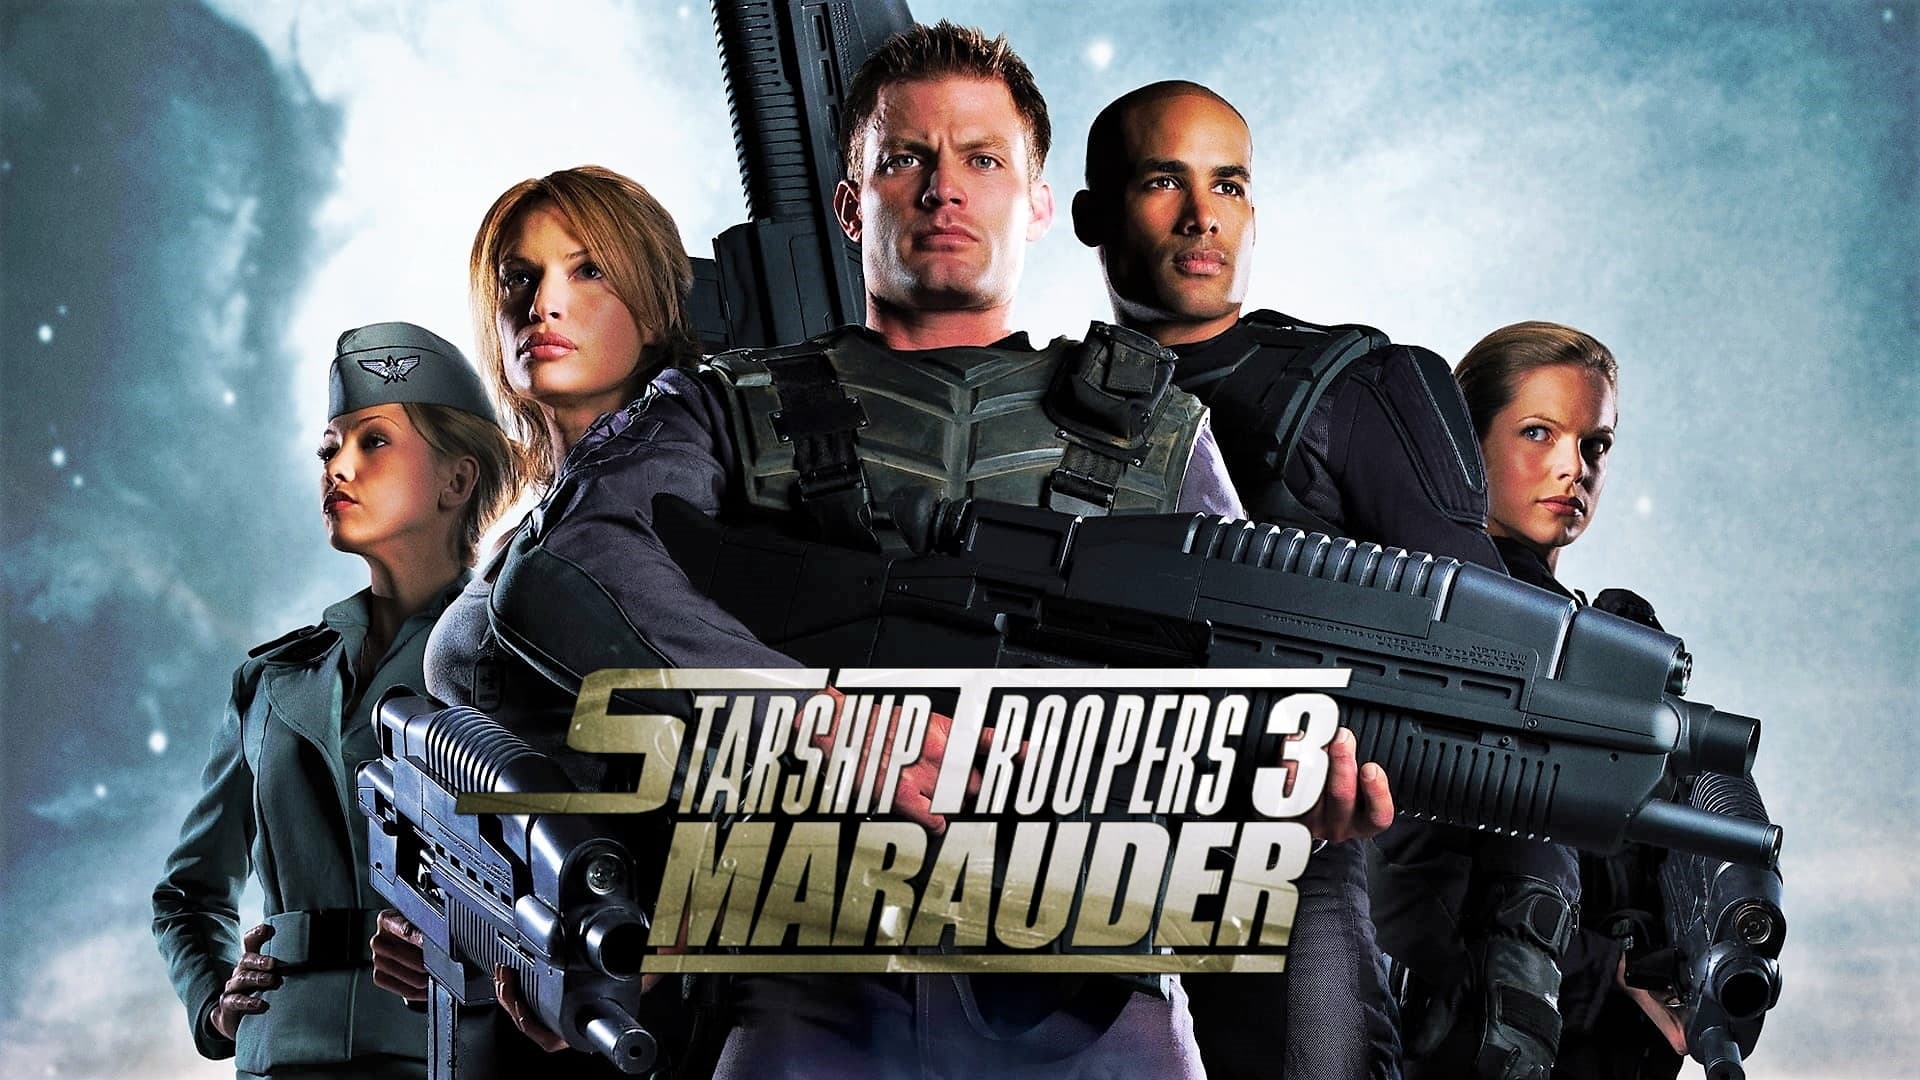 Starship Troopers 3 (2008)